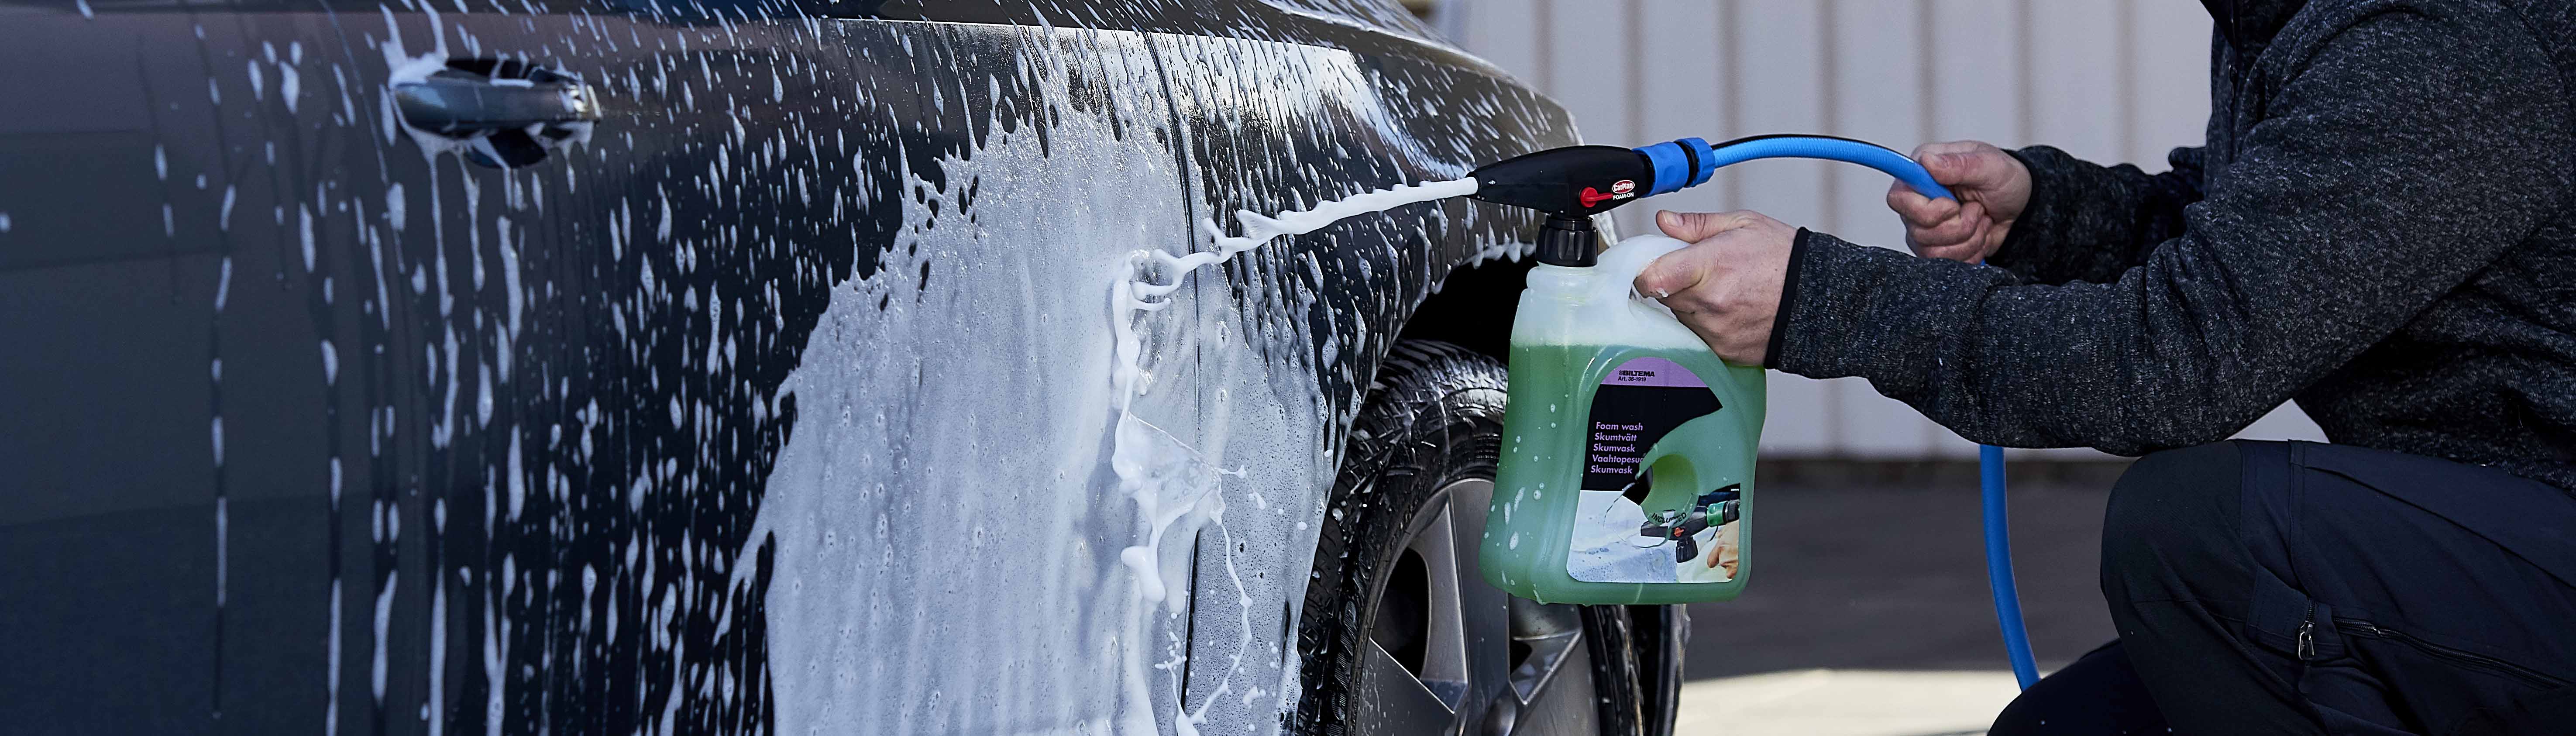 Car washing buying guide – say goodbye to ingrained dirt and traffic dust